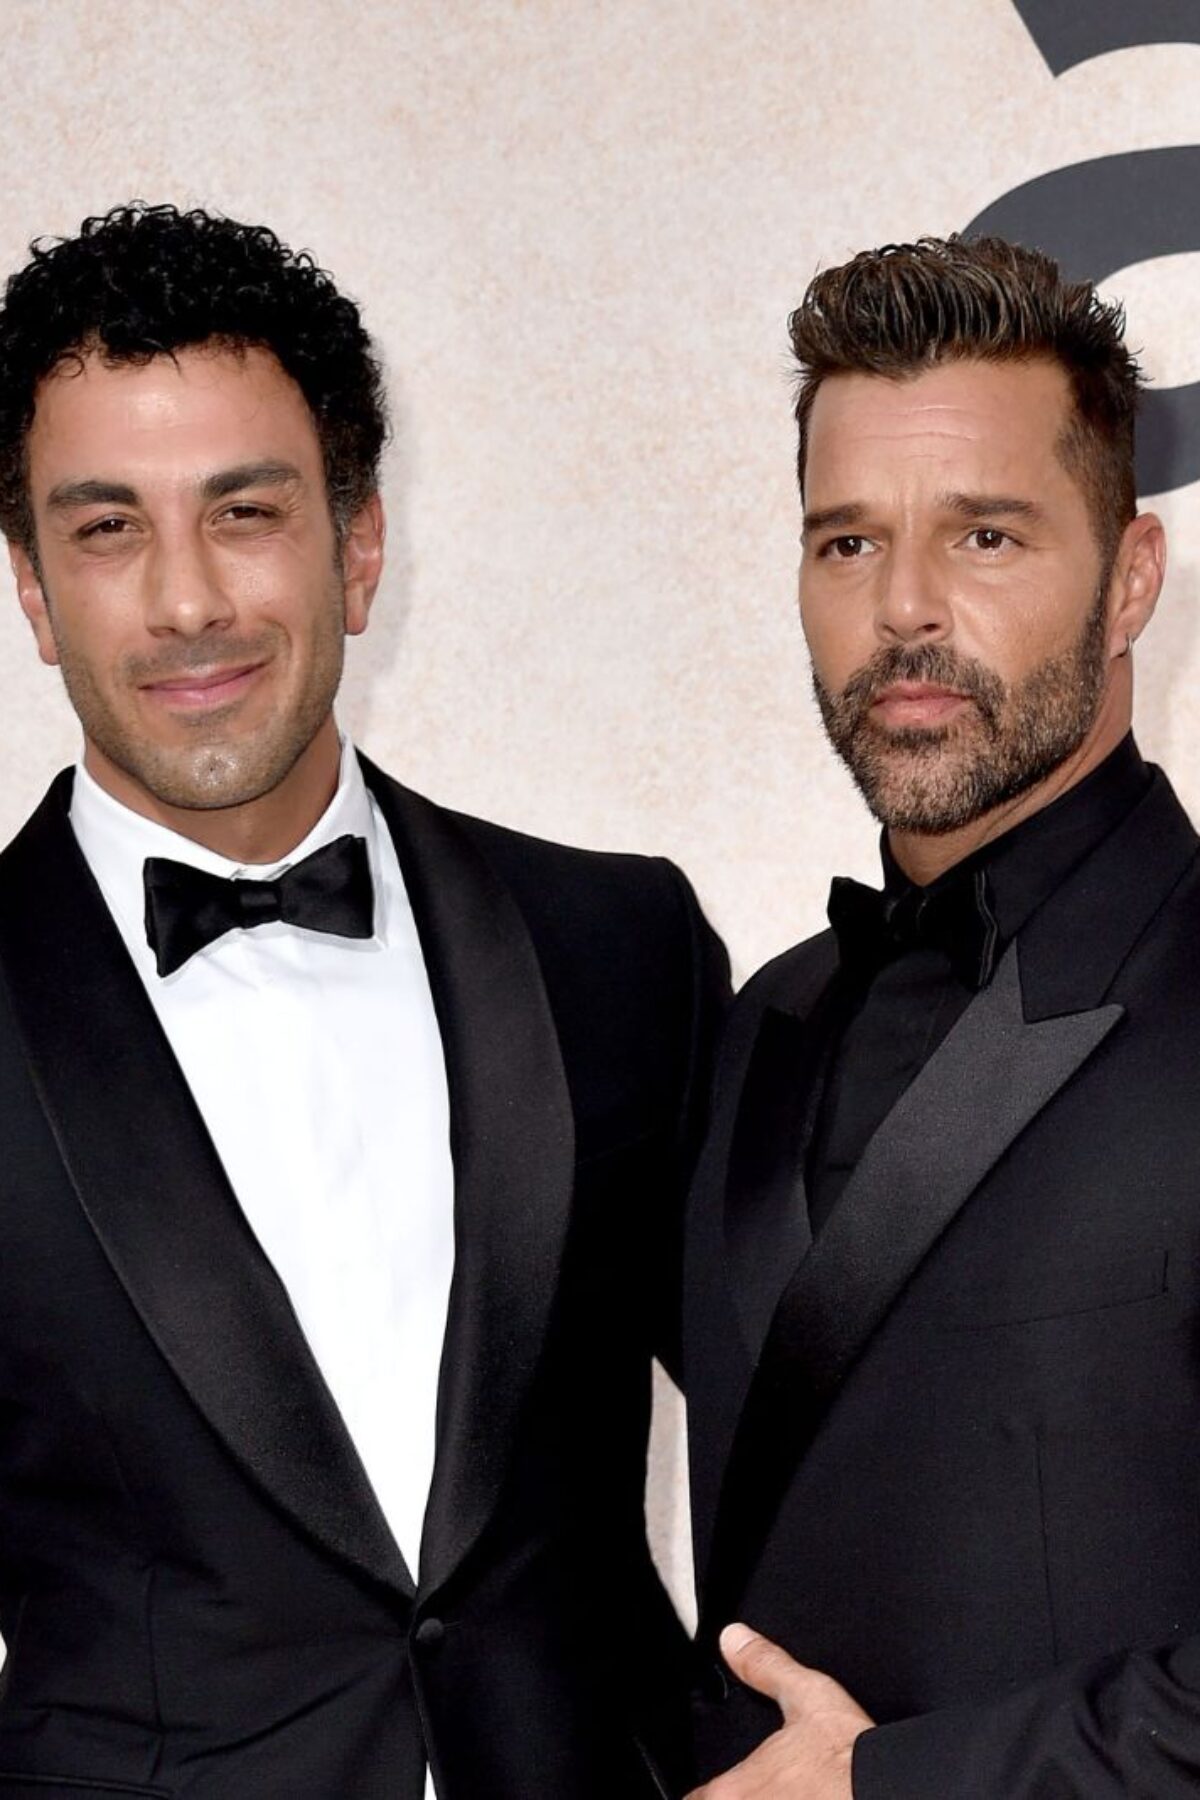 Ricky Martin and Jwan Yosef attend amfAR Gala Cannes 2022 at Hotel du Cap-Eden-Roc on May 26, 2022 in Cap d'Antibes, France. (Photo by Lionel Hahn/Getty Images)